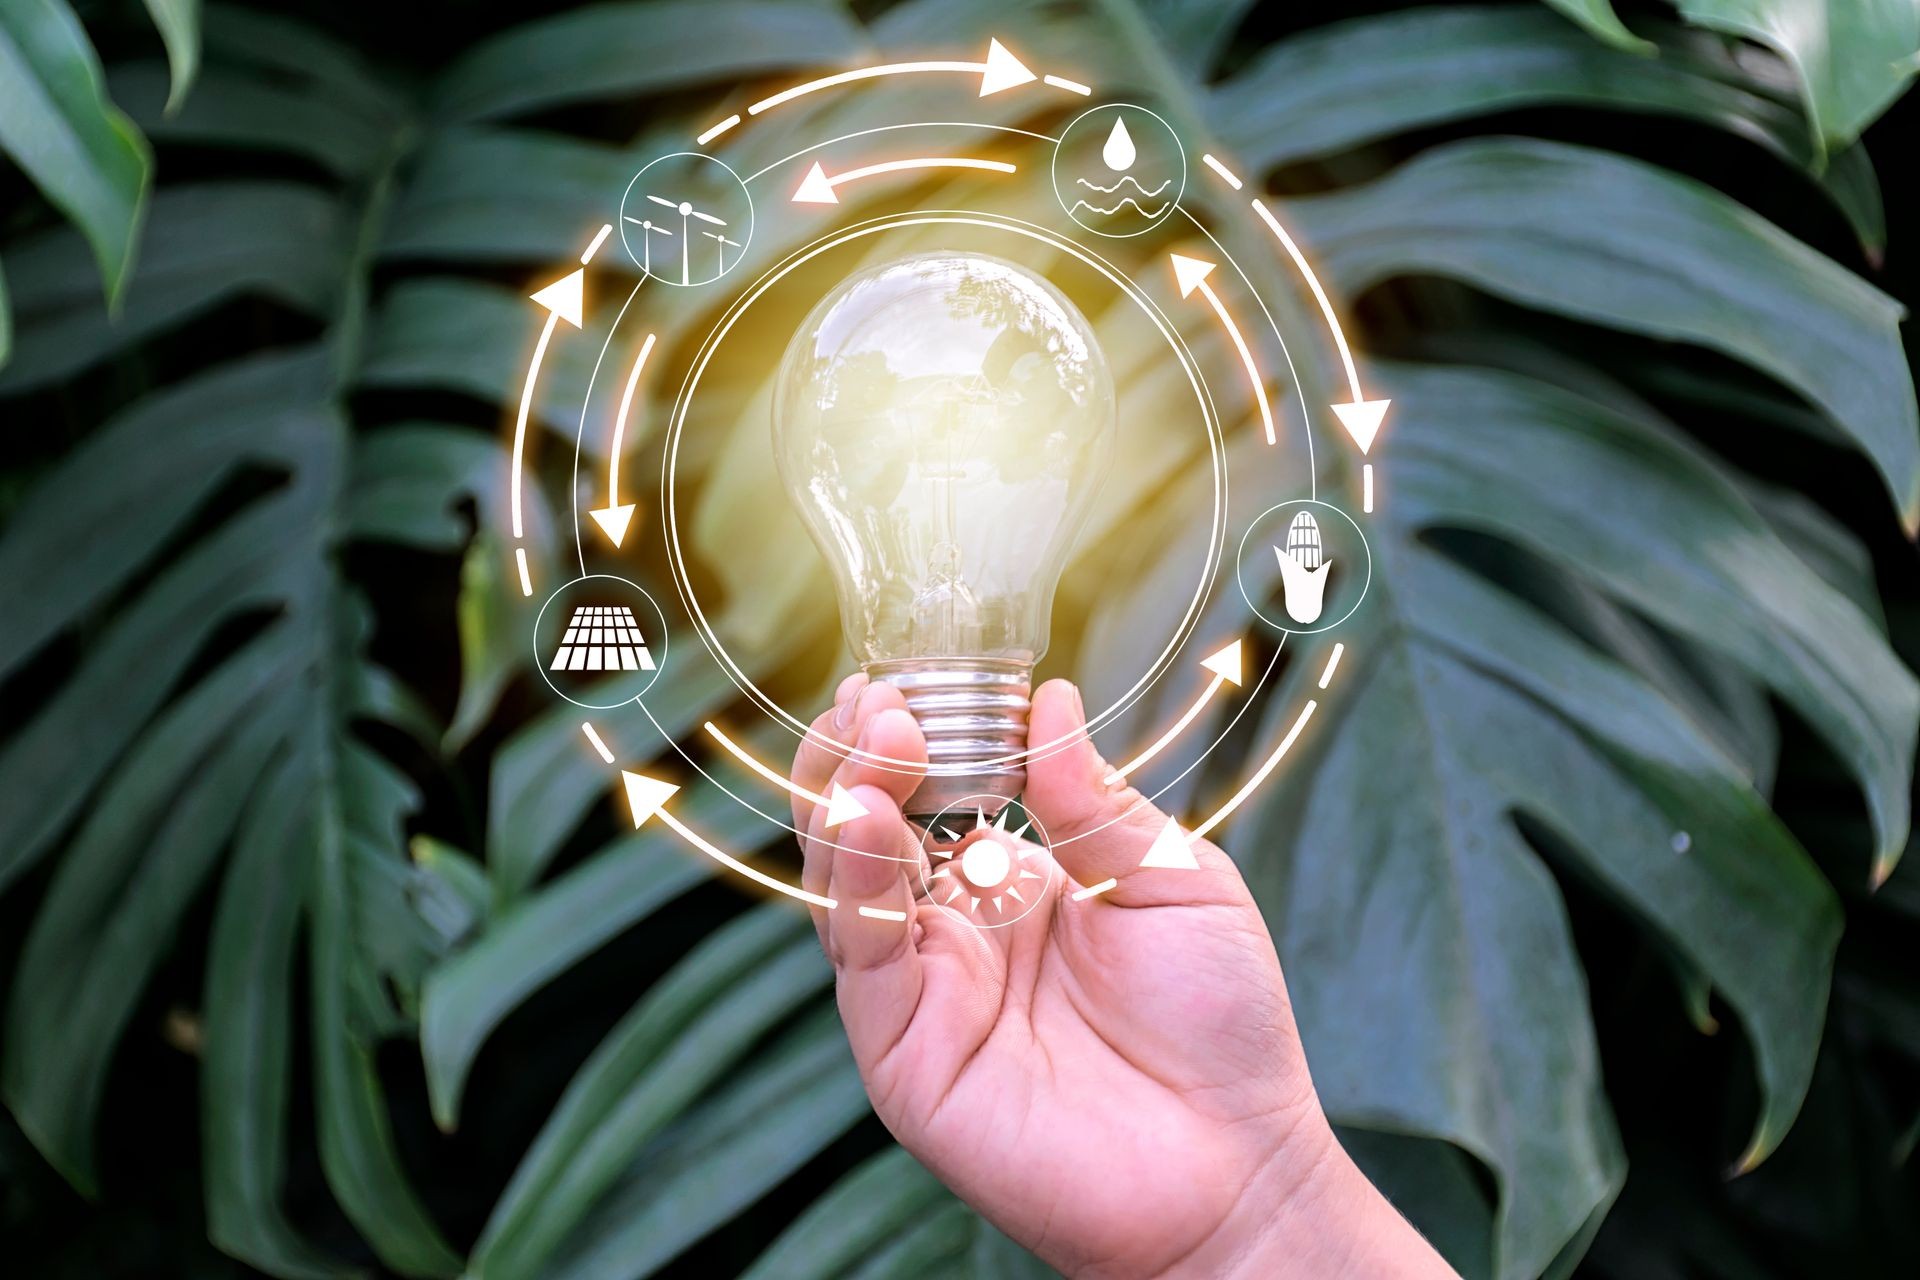 Hand holding light bulb in front of global show the world's consumption with icons energy sources for renewable, sustainable development. Ecology concept. The background is green leaves.